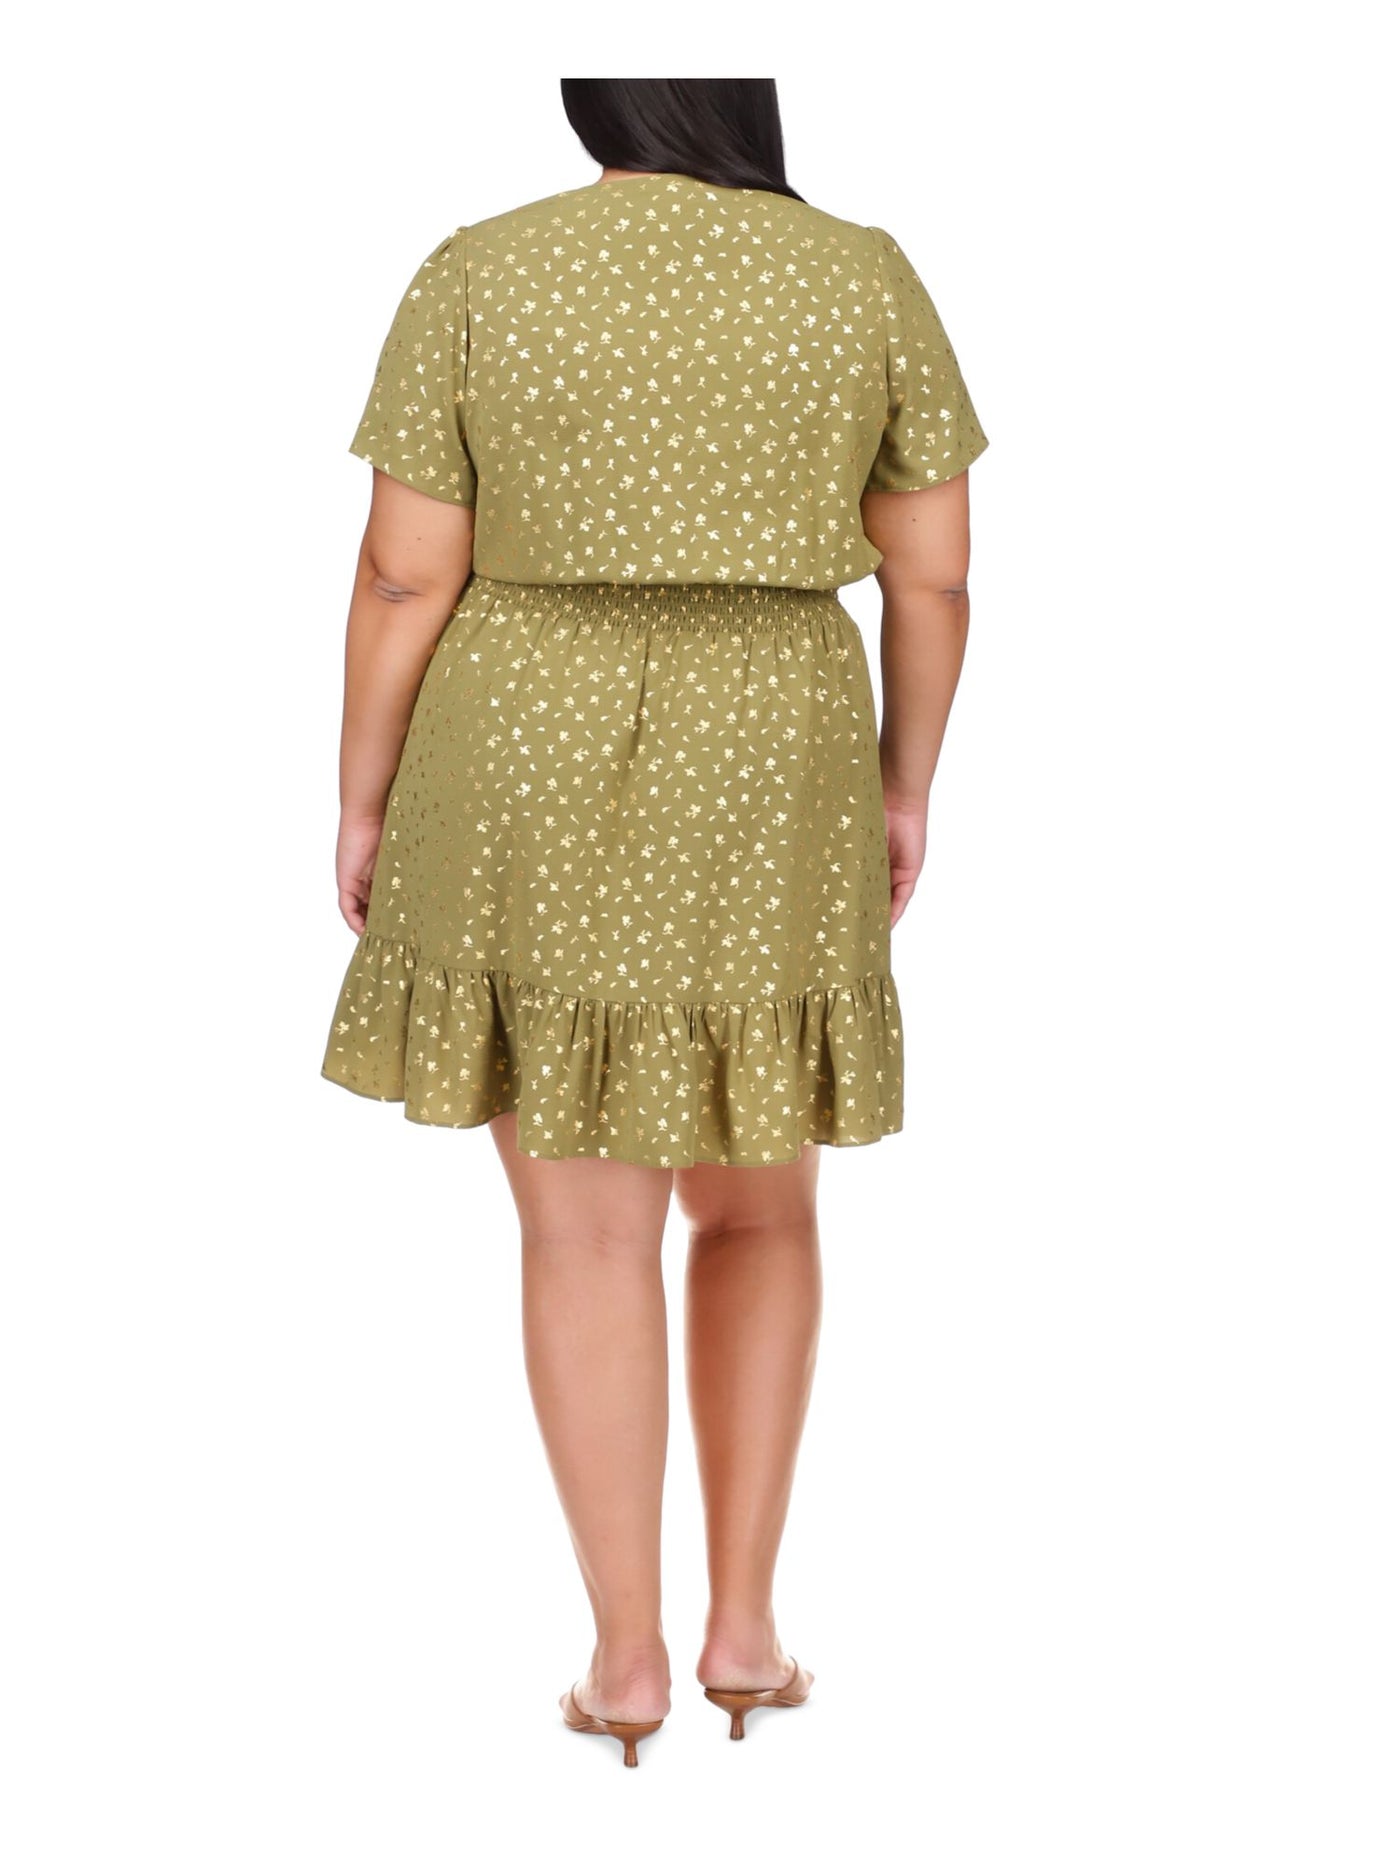 MICHAEL KORS Womens Green Smocked Ruffled Unlined Hook And Eye Closure Printed Short Sleeve V Neck Above The Knee Faux Wrap Dress Plus 3X